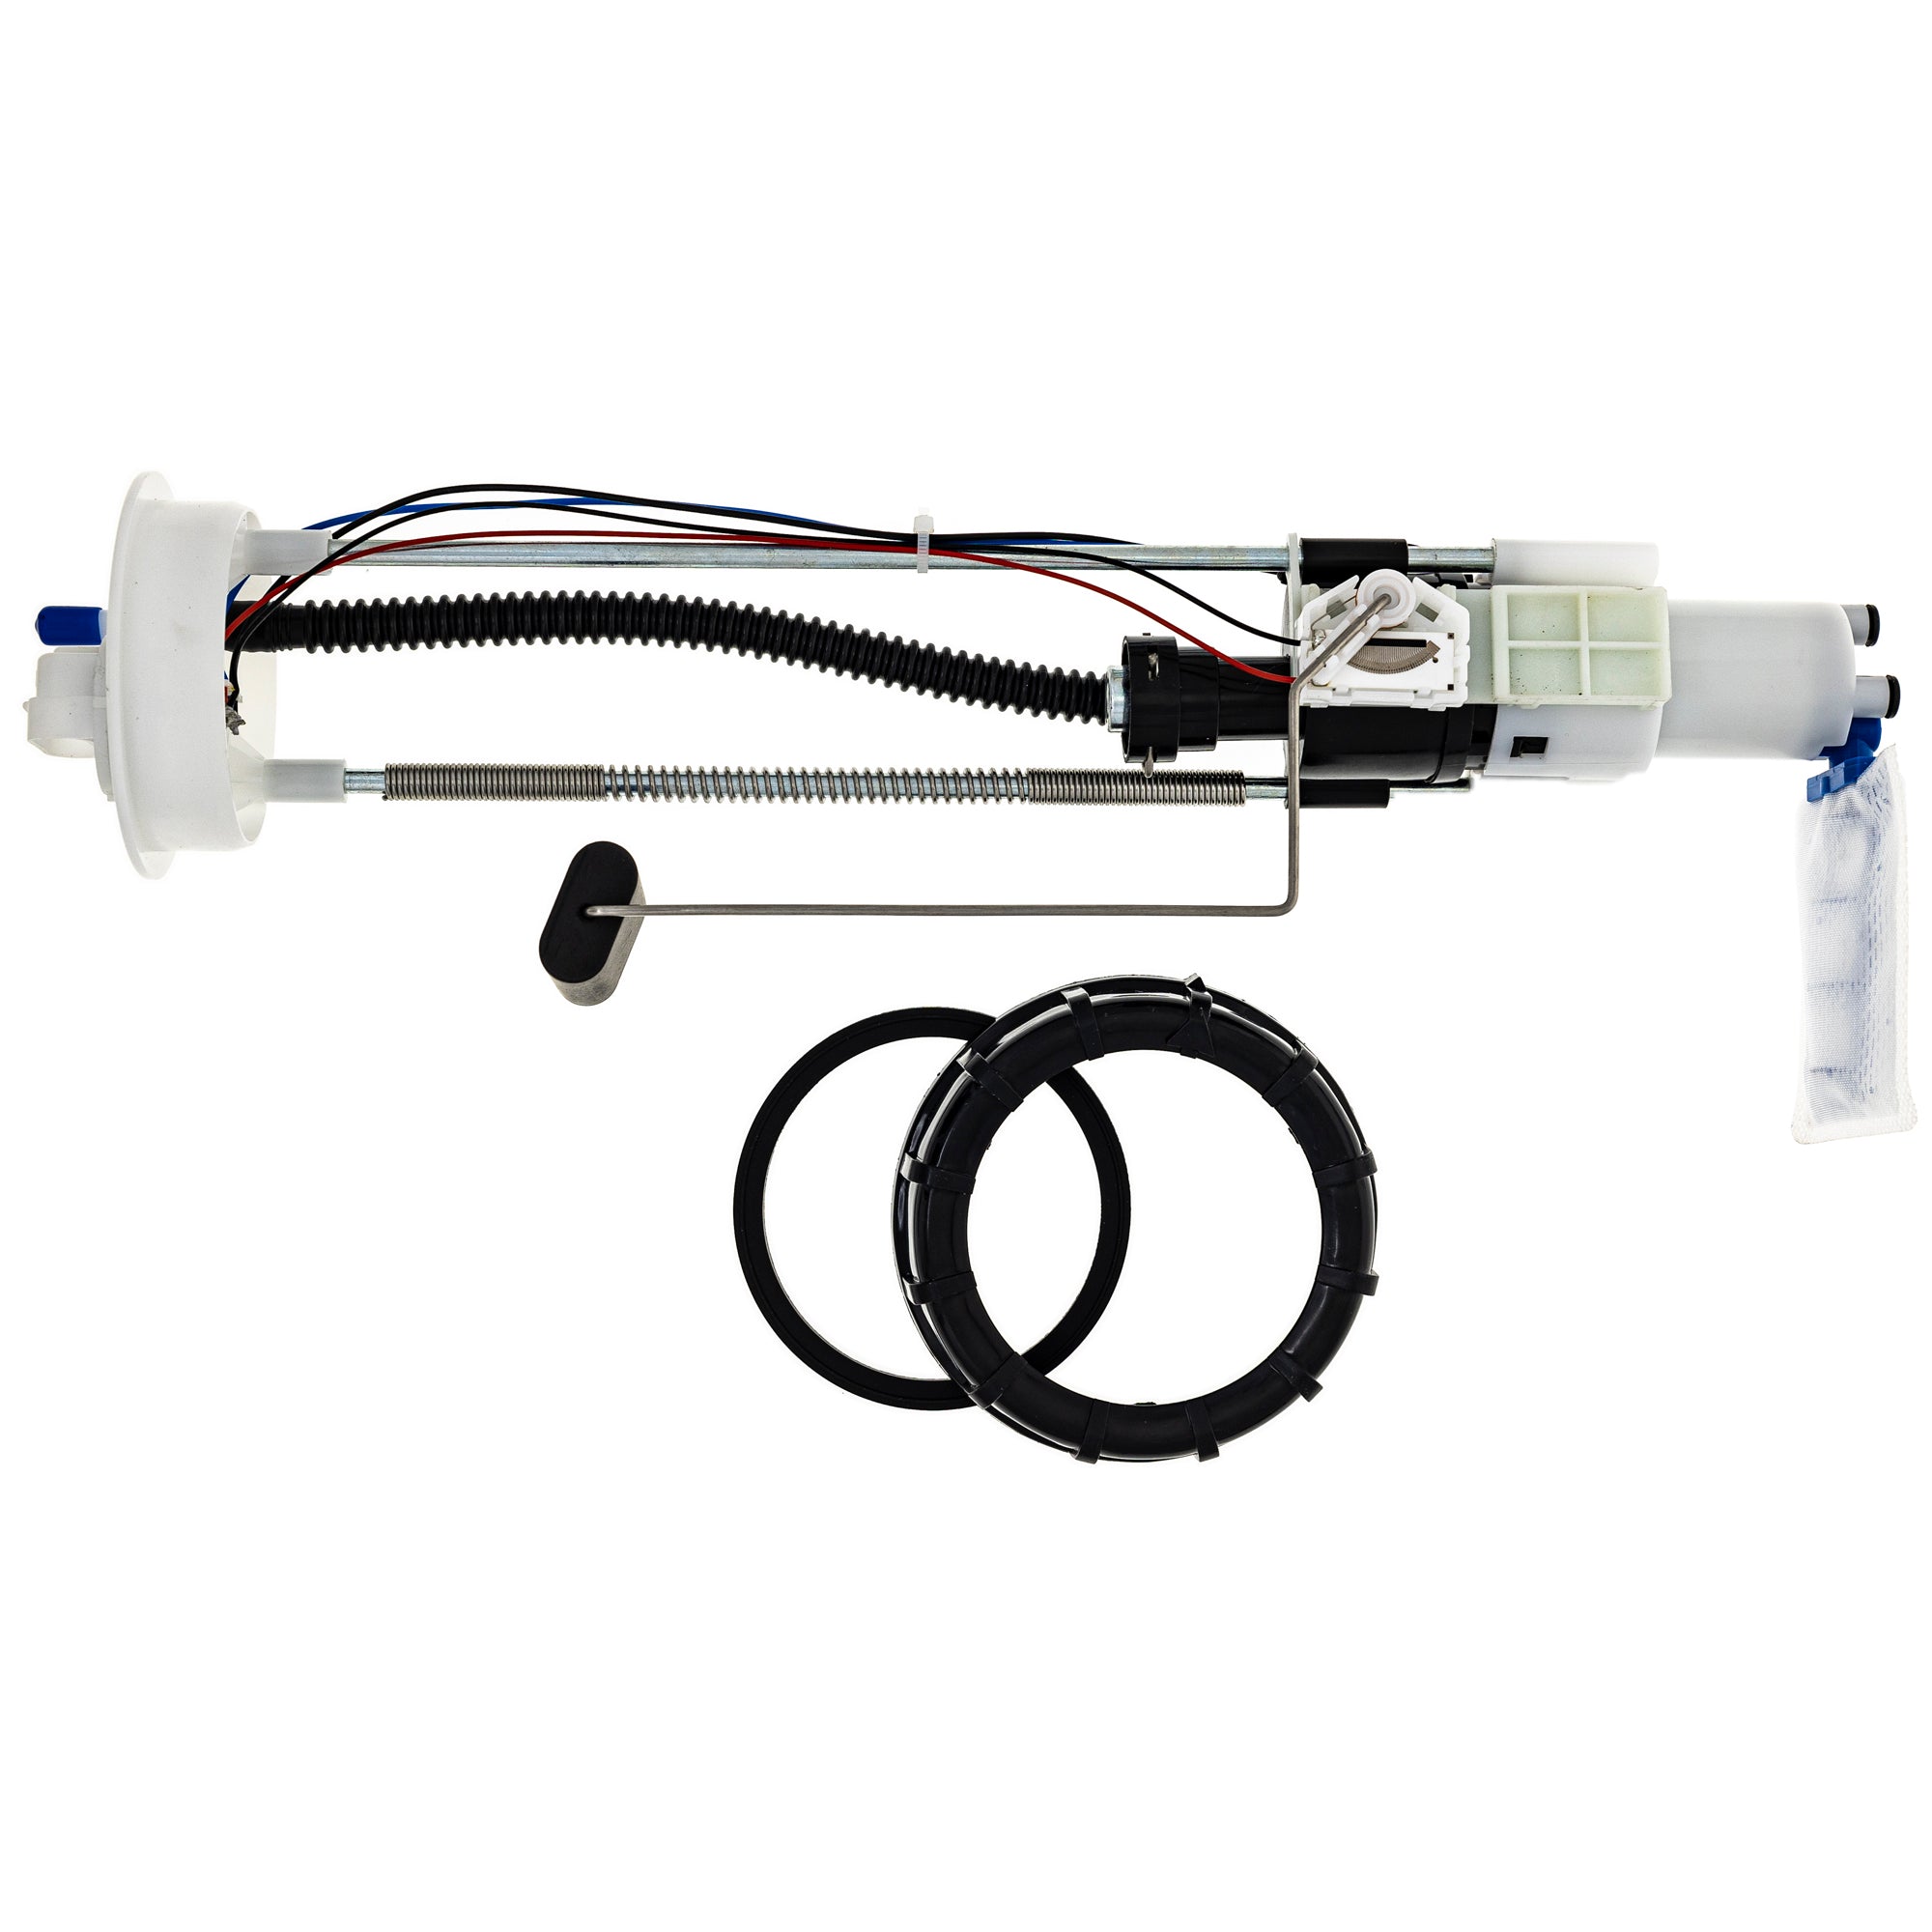 Fuel Pump Assembly For Polaris 2521197 2521092 2204402